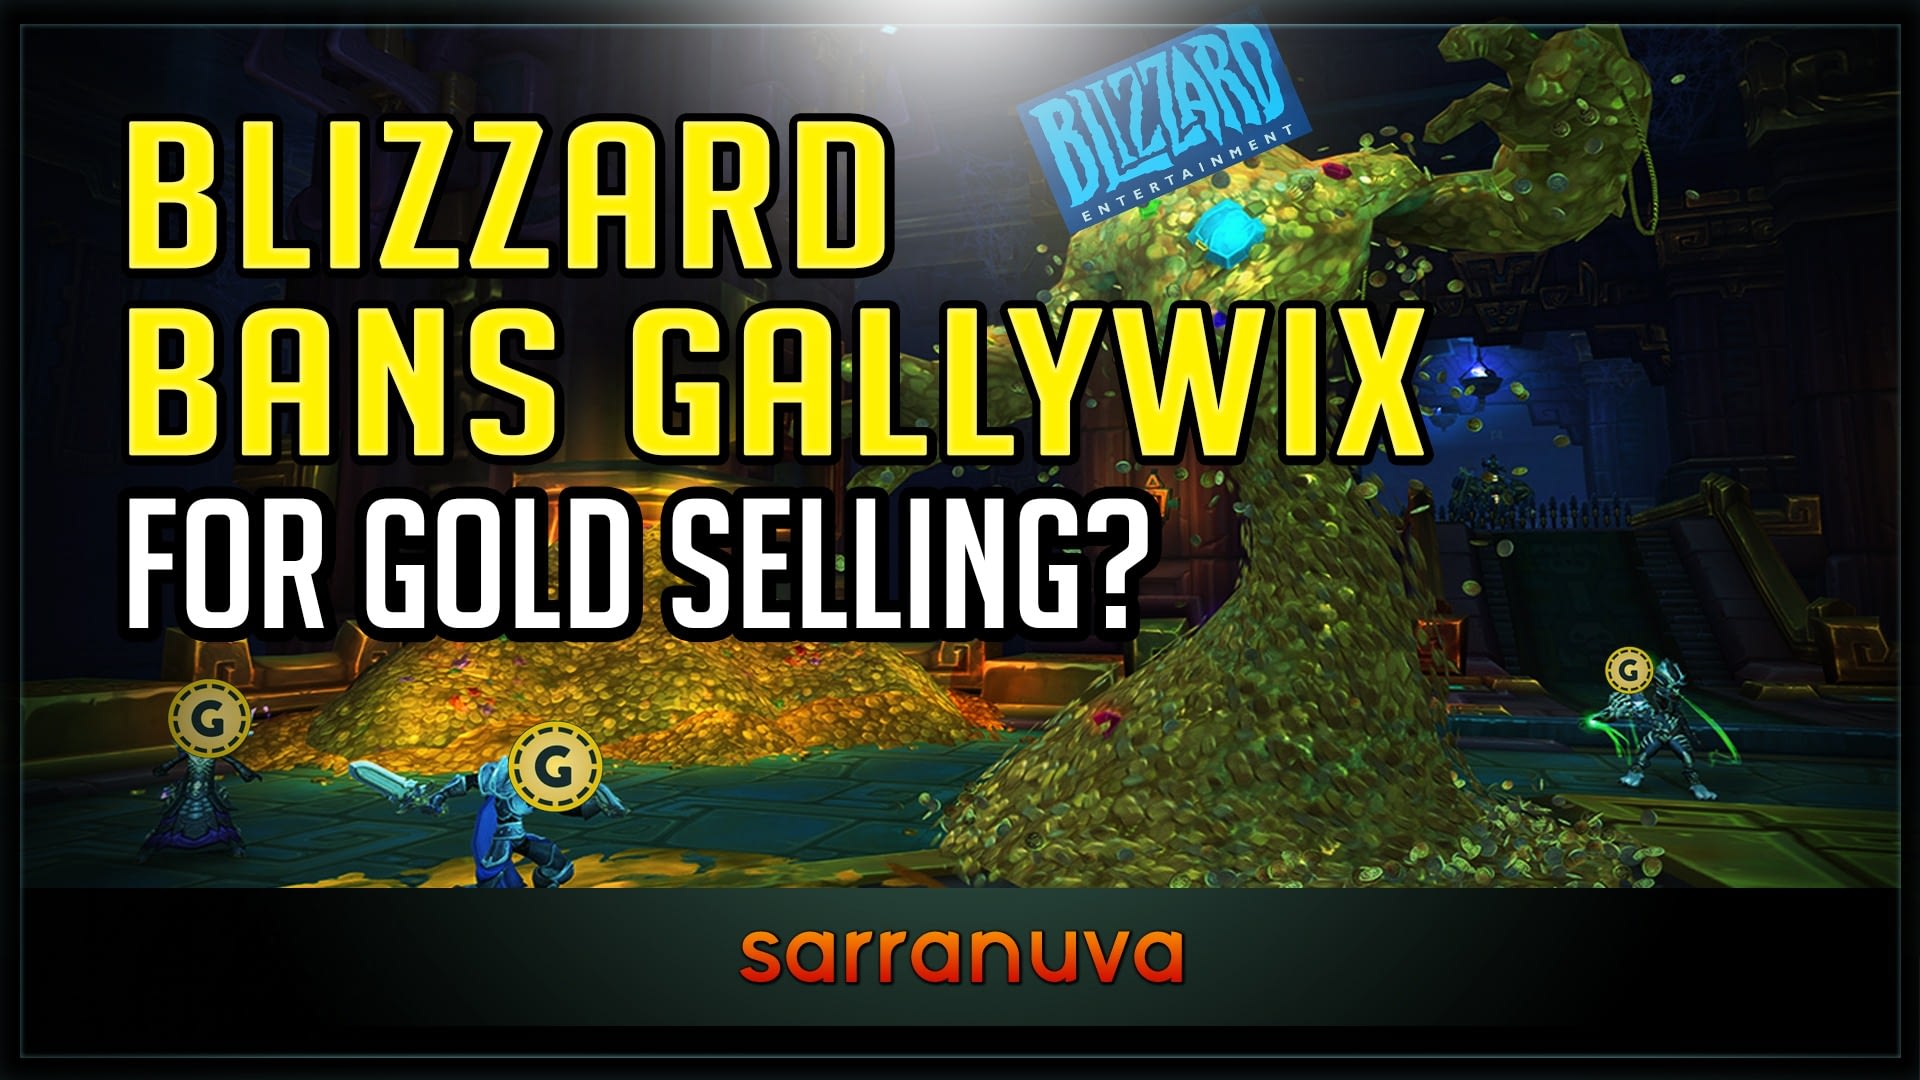 Blizzard Bans Gallywix for Gold Selling RMT